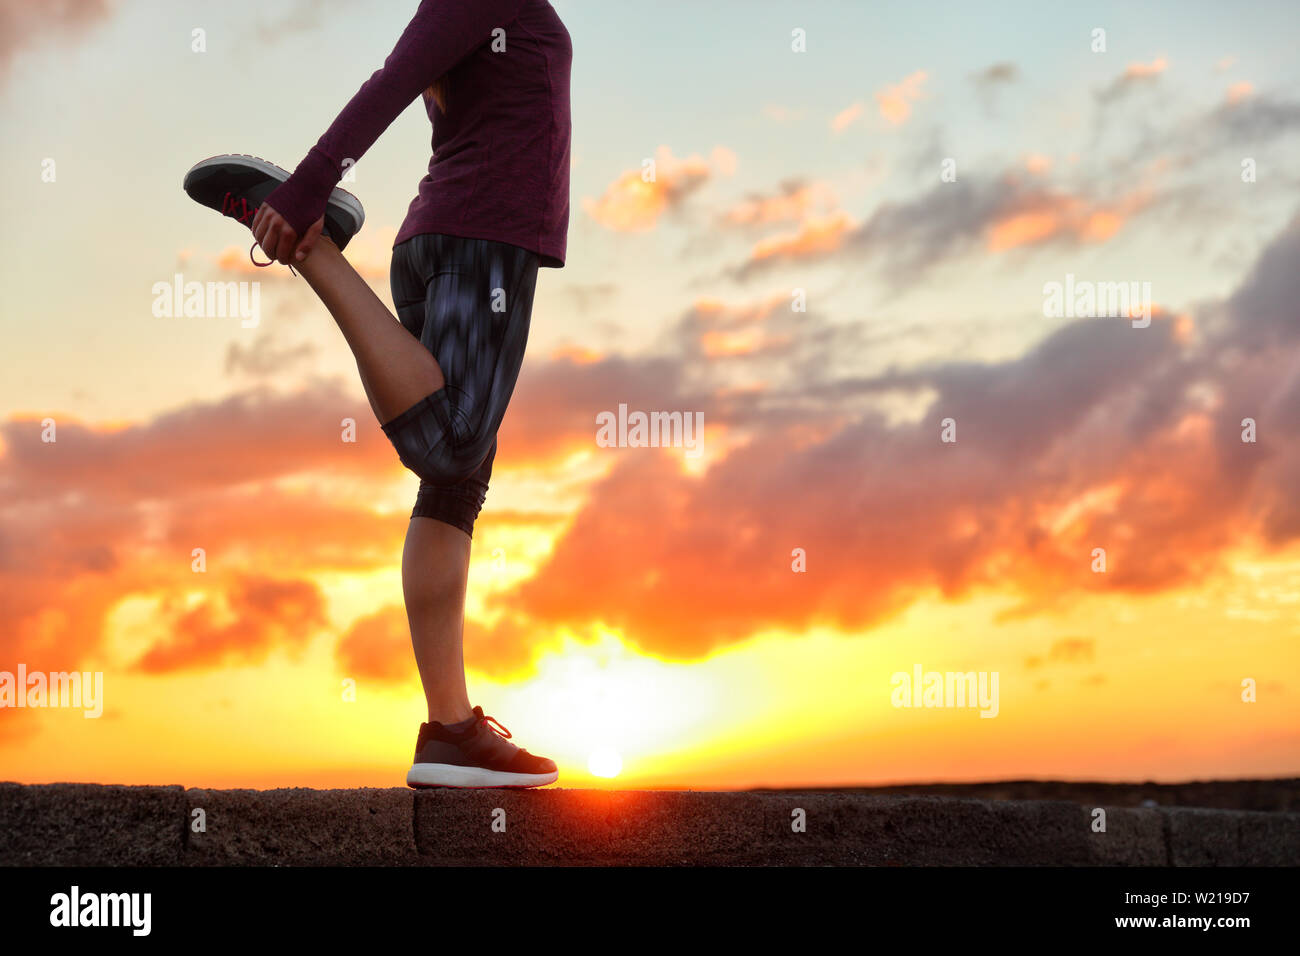 Running runner woman stretching leg muscle preparing for sunset trail run in outdoor summer nature. Female athlete lower body crop of feet doing legs stretches getting ready for cardio warmup. Stock Photo